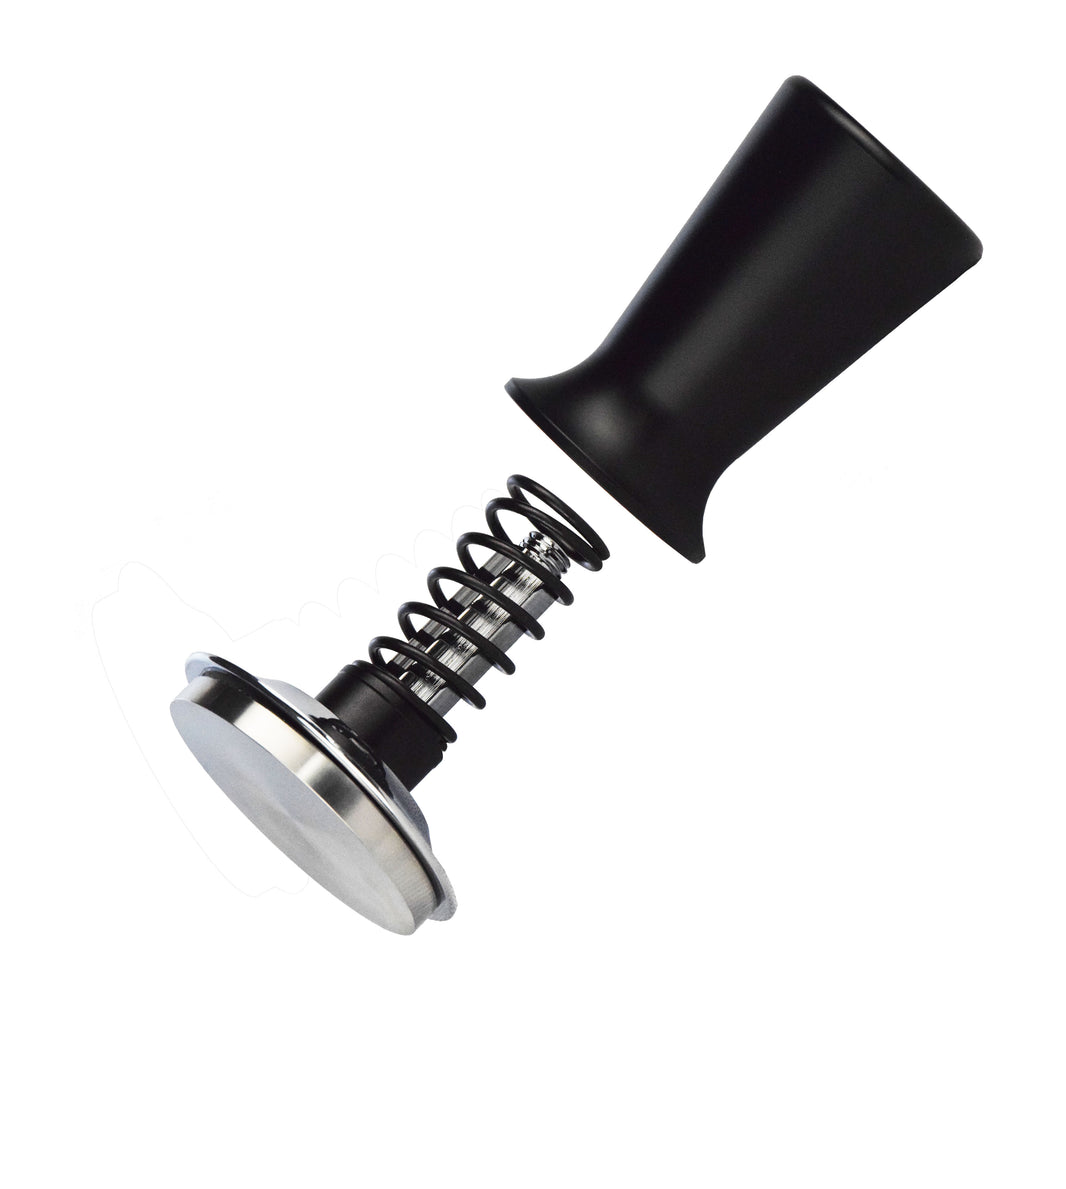 Coffee tamper stainless steel with black - Brewing Edge